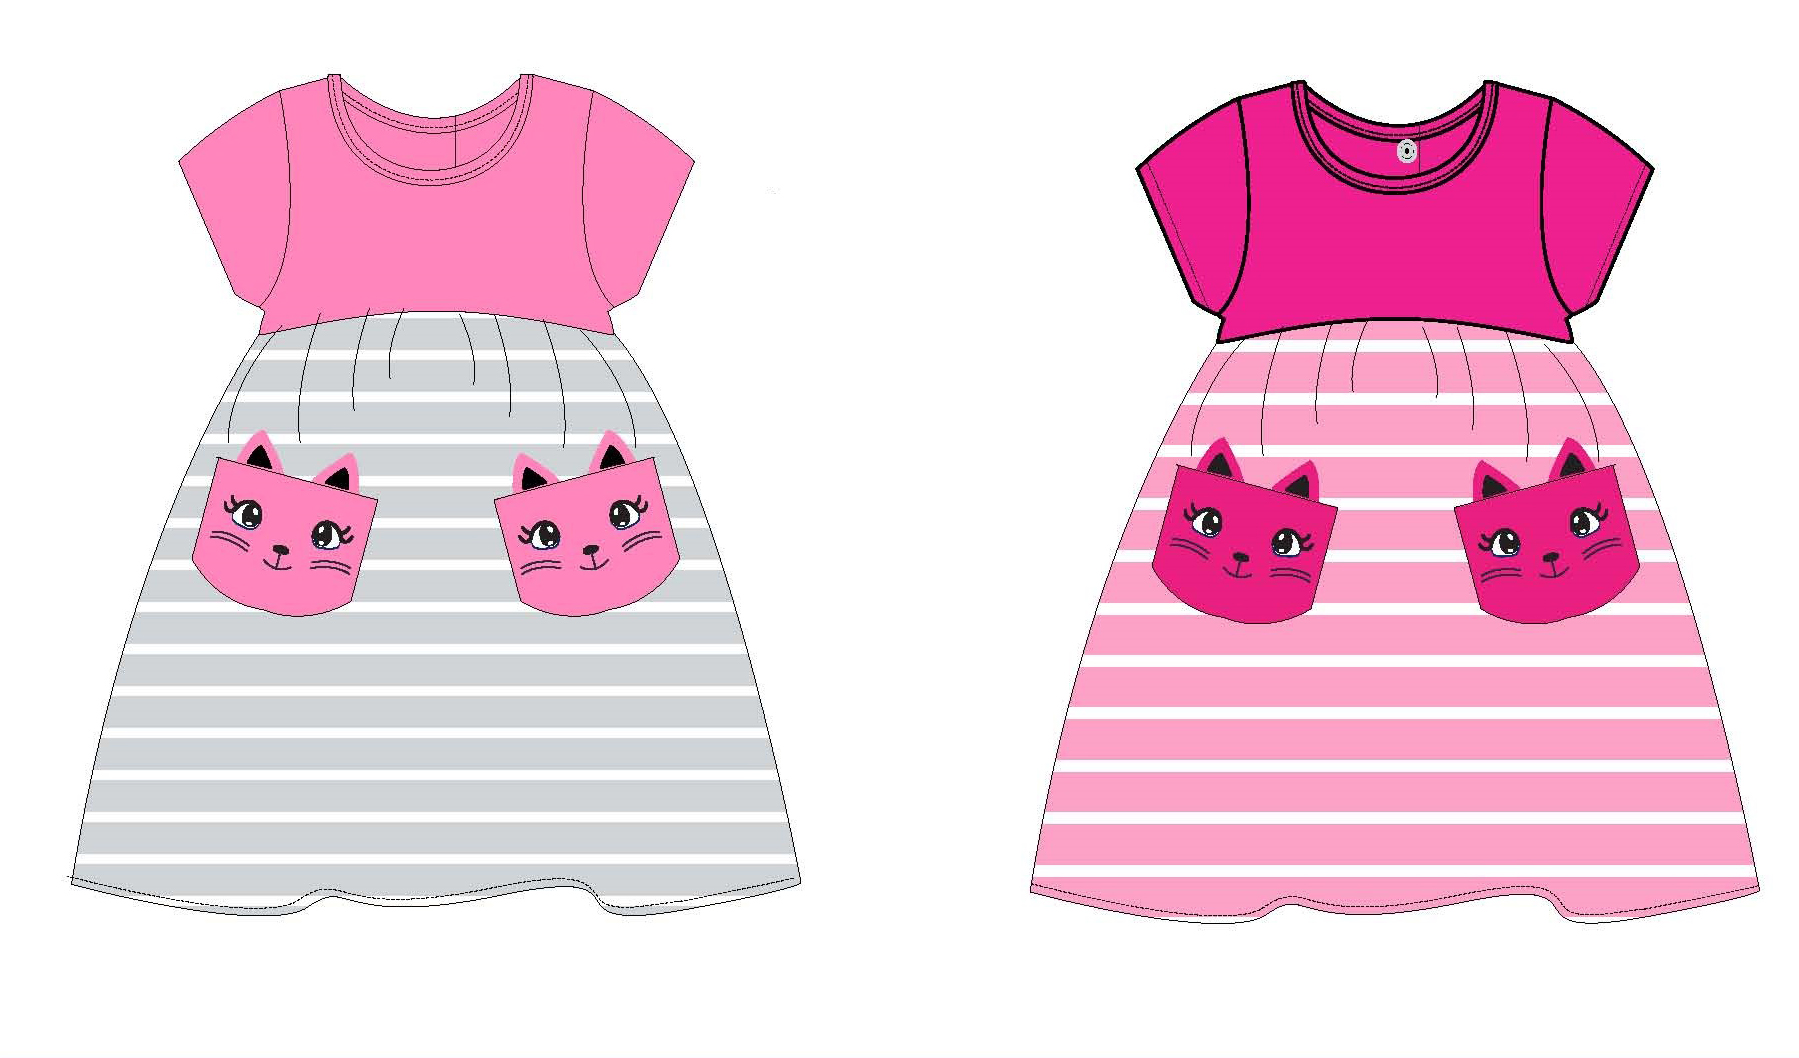 Infant Girl's Knit Striped Dresses w/ Embroidered Cat Printed Pockets - Sizes 0/3M-9M